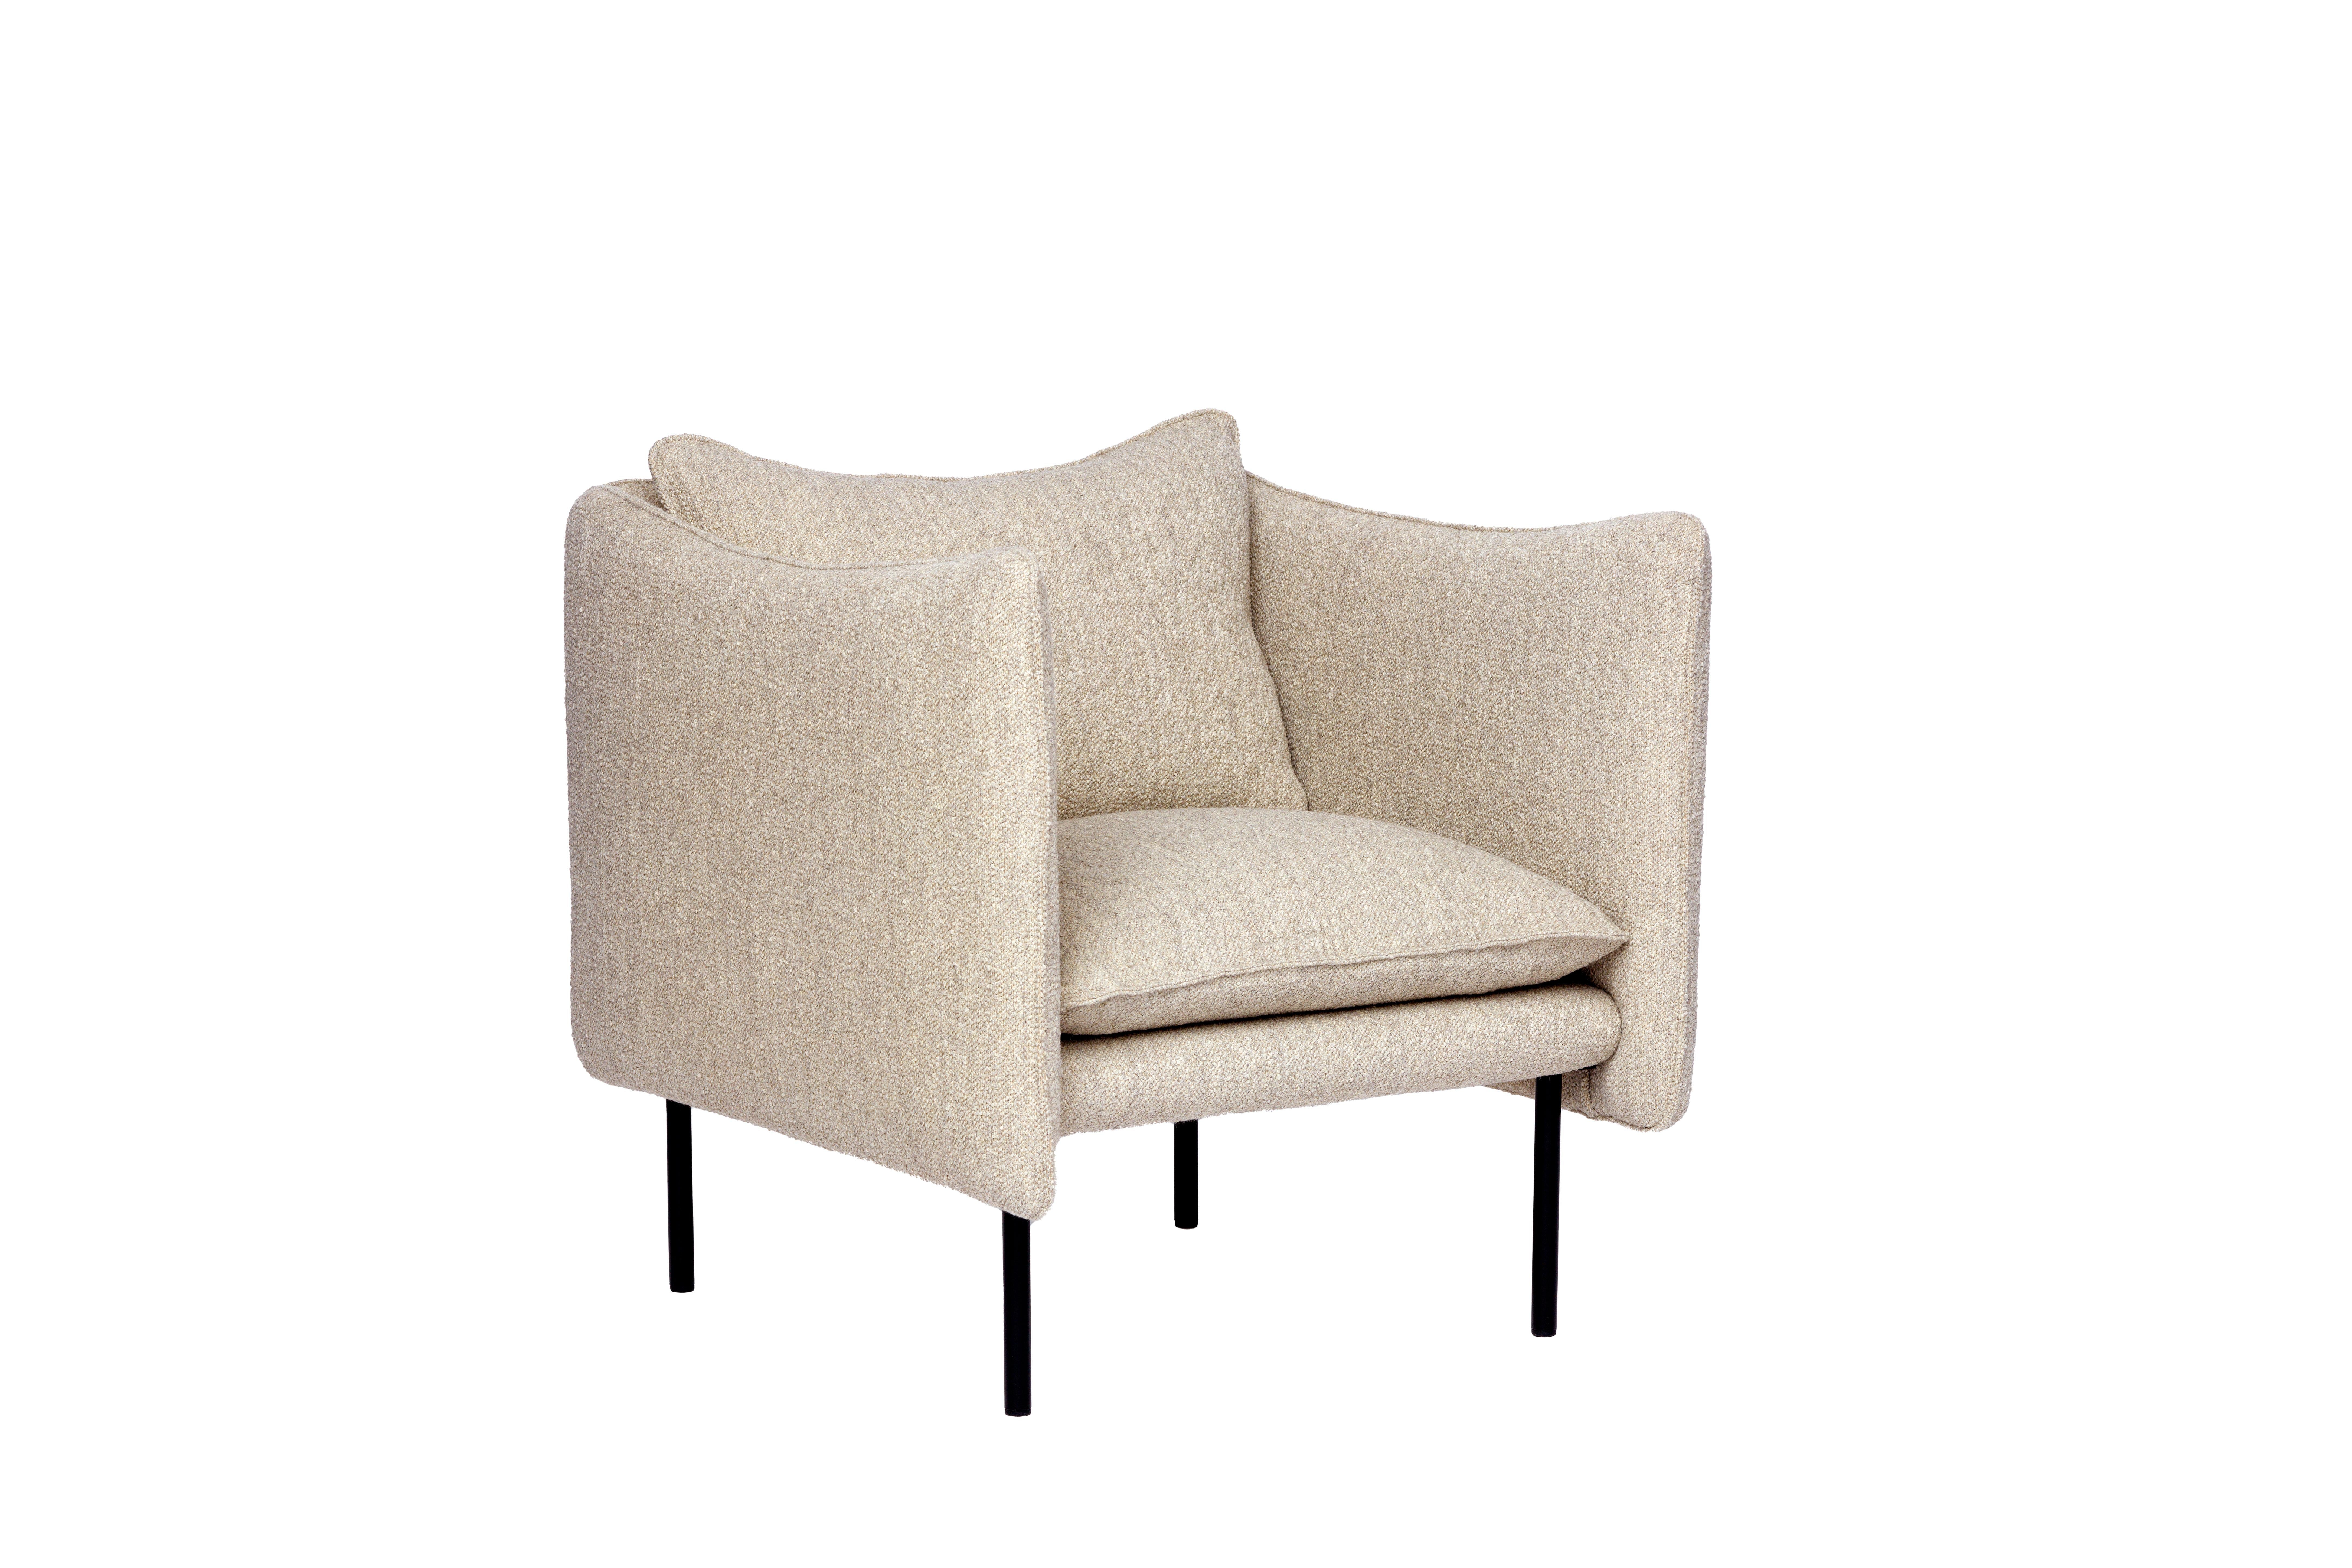 Organic Modern Contemporary Armchair 'Tiki' by Fogia, Sand Fabric  For Sale